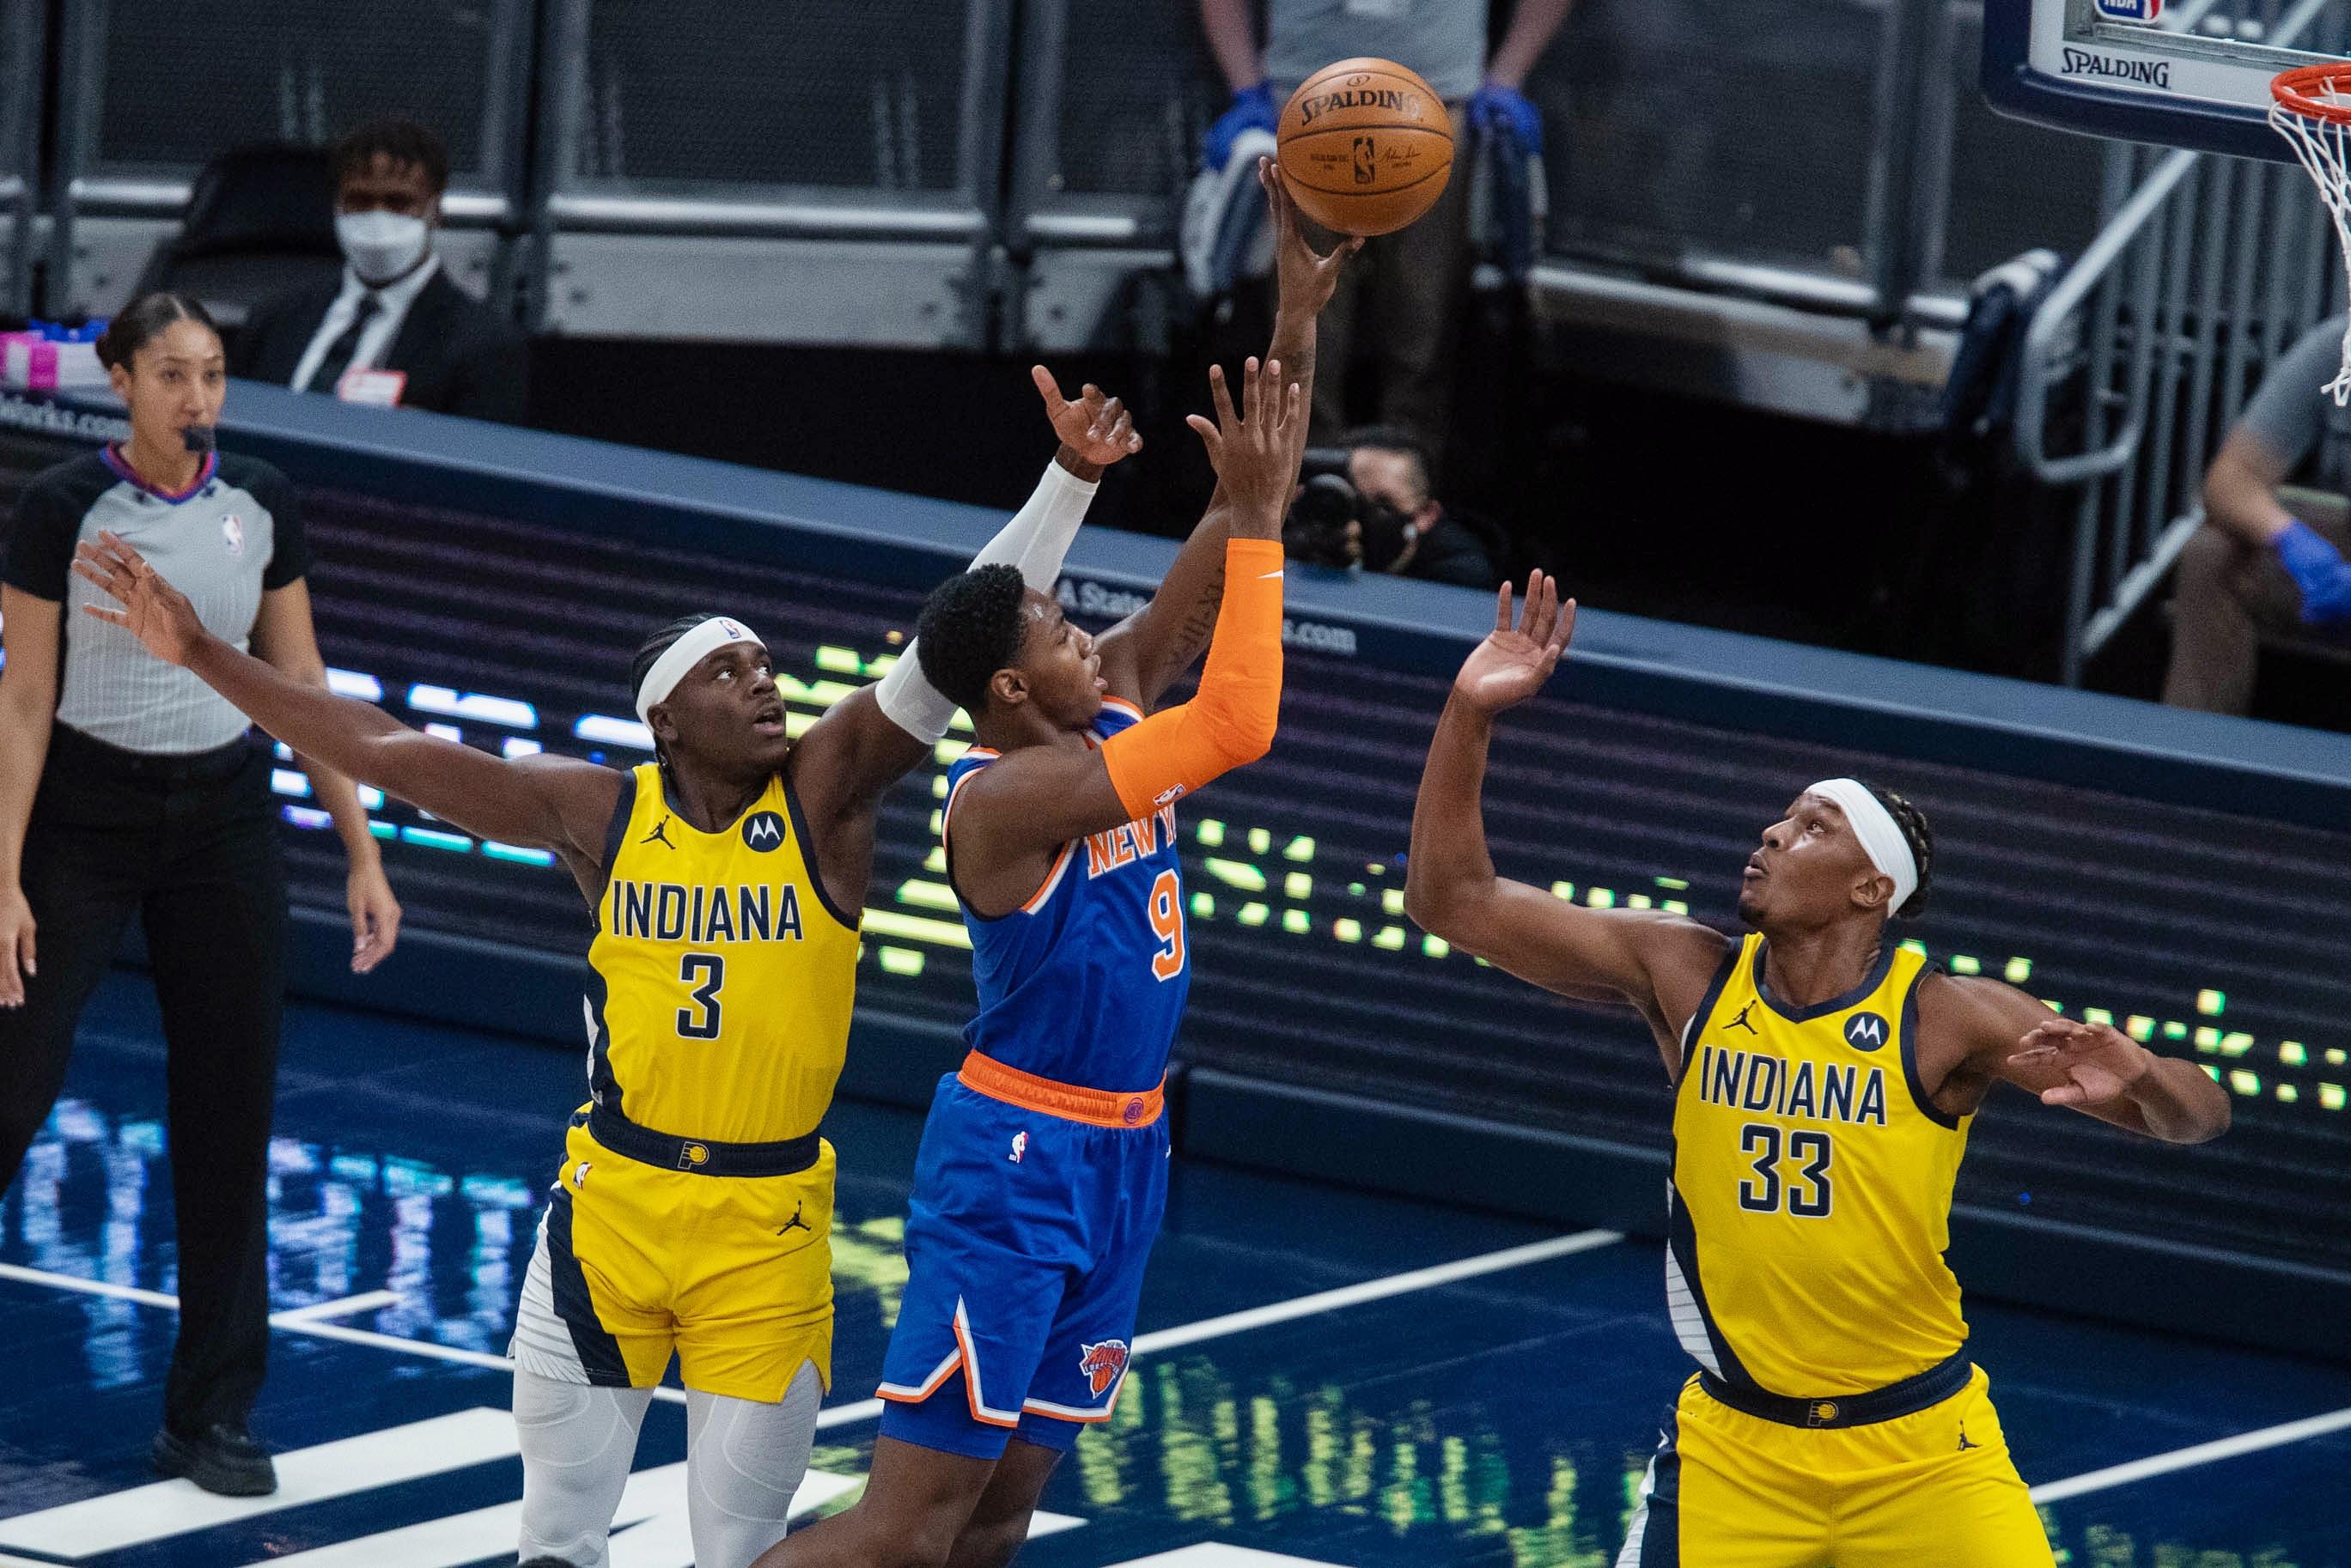 Jan 2, 2021; Indianapolis, Indiana, USA; New York Knicks guard RJ Barrett (9) shoots the ball against Indiana Pacers guard Aaron Holiday (3) and center Myles Turner (33) in the first quarter at Bankers Life Fieldhouse. / Trevor Ruszkowski-USA TODAY Sports